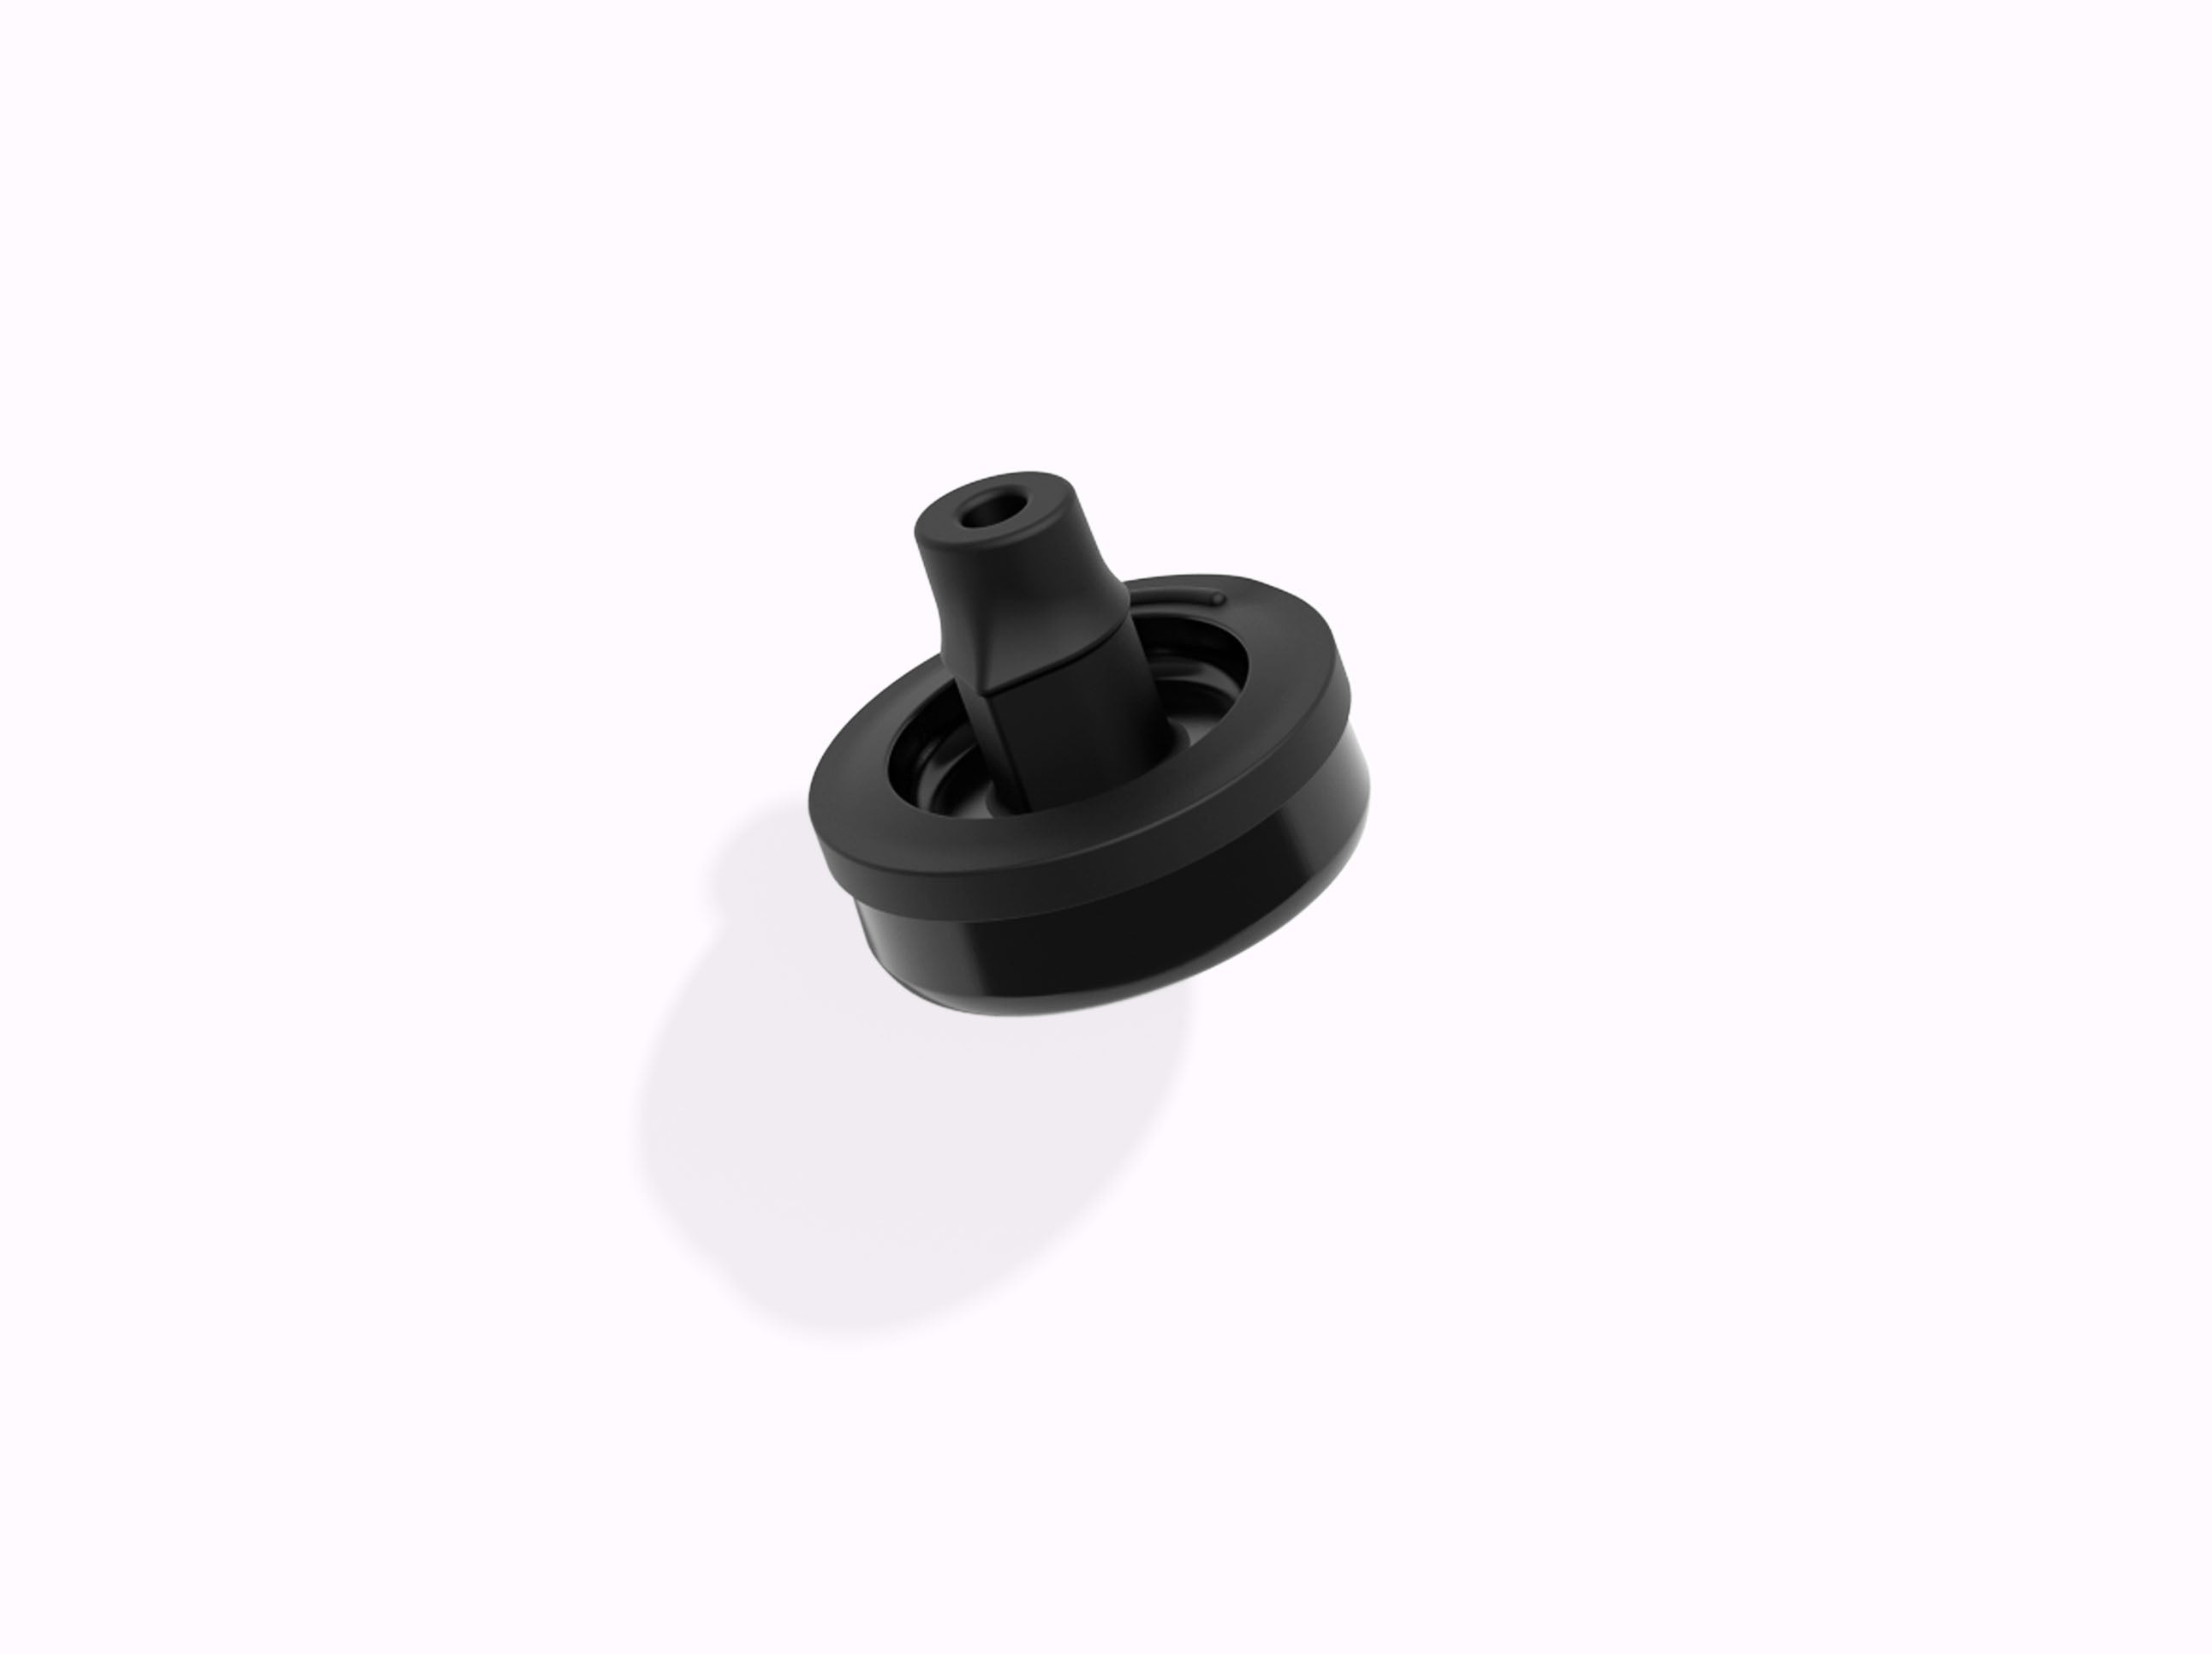 https://cdn.shopify.com/s/files/1/0063/9834/5280/products/AirUp_PDP_Accessories_Mouthpiece_PitchBlack.jpg?v=1674580626